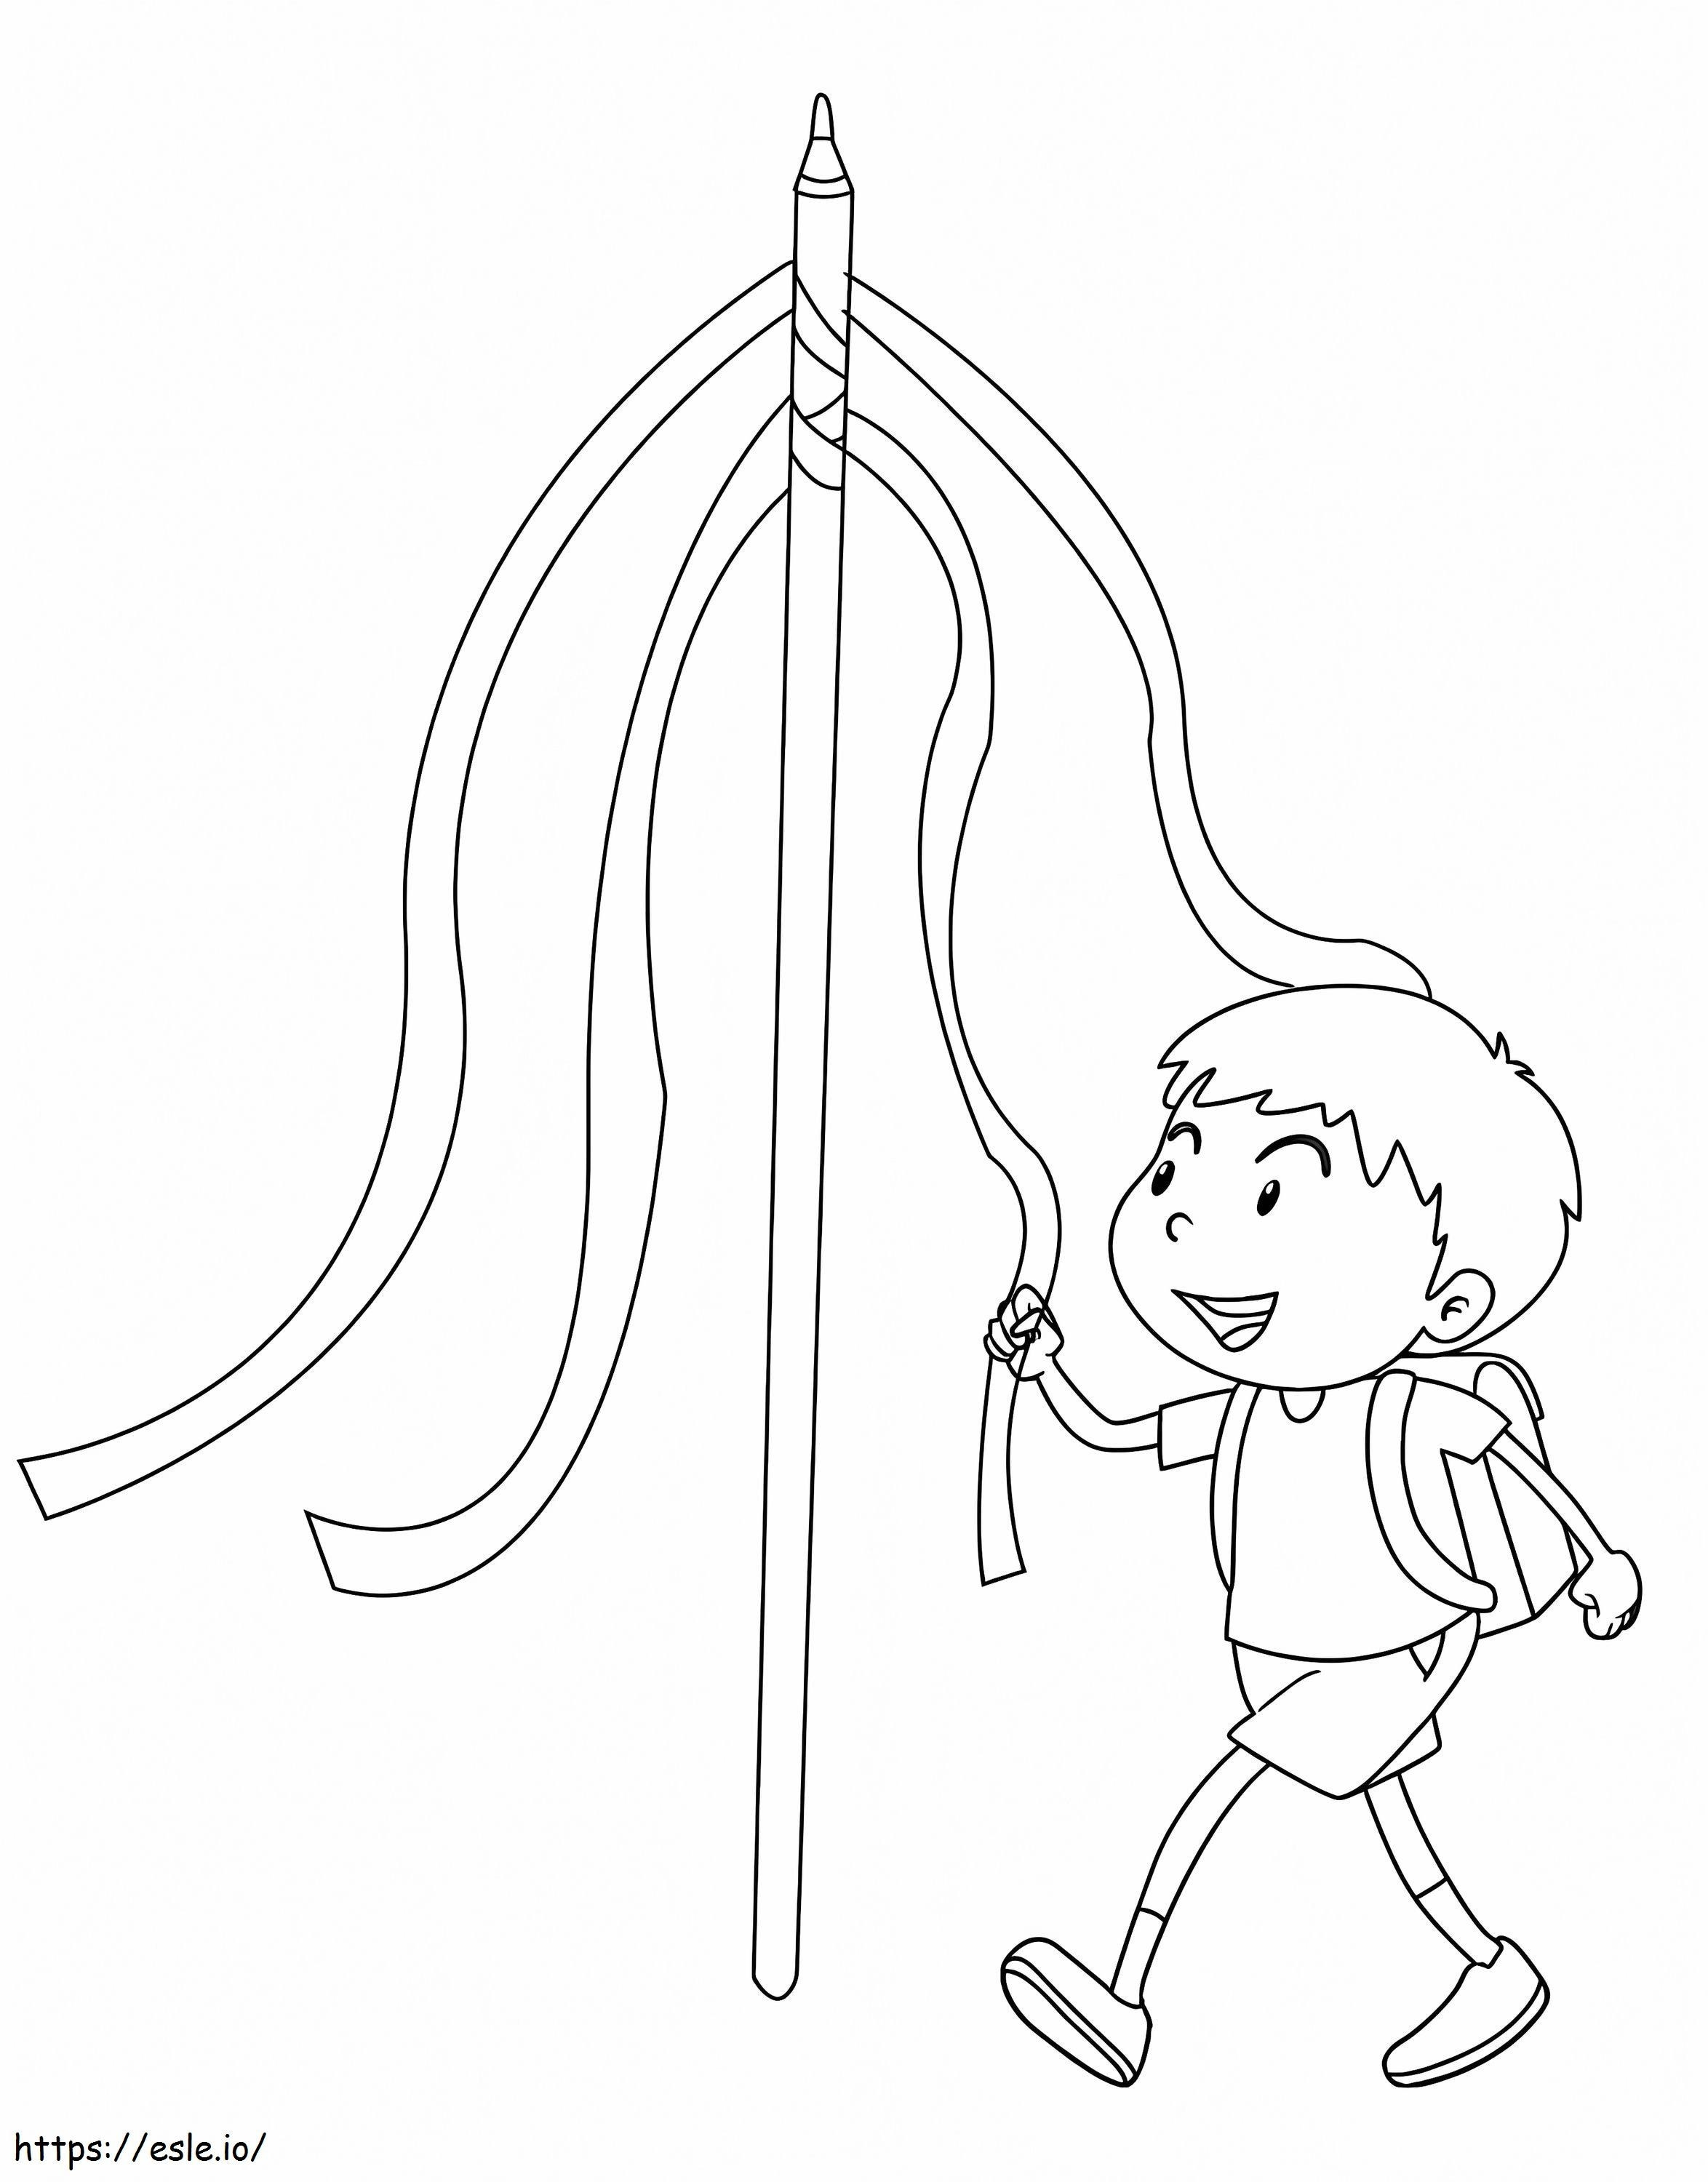 Boy On May Day coloring page